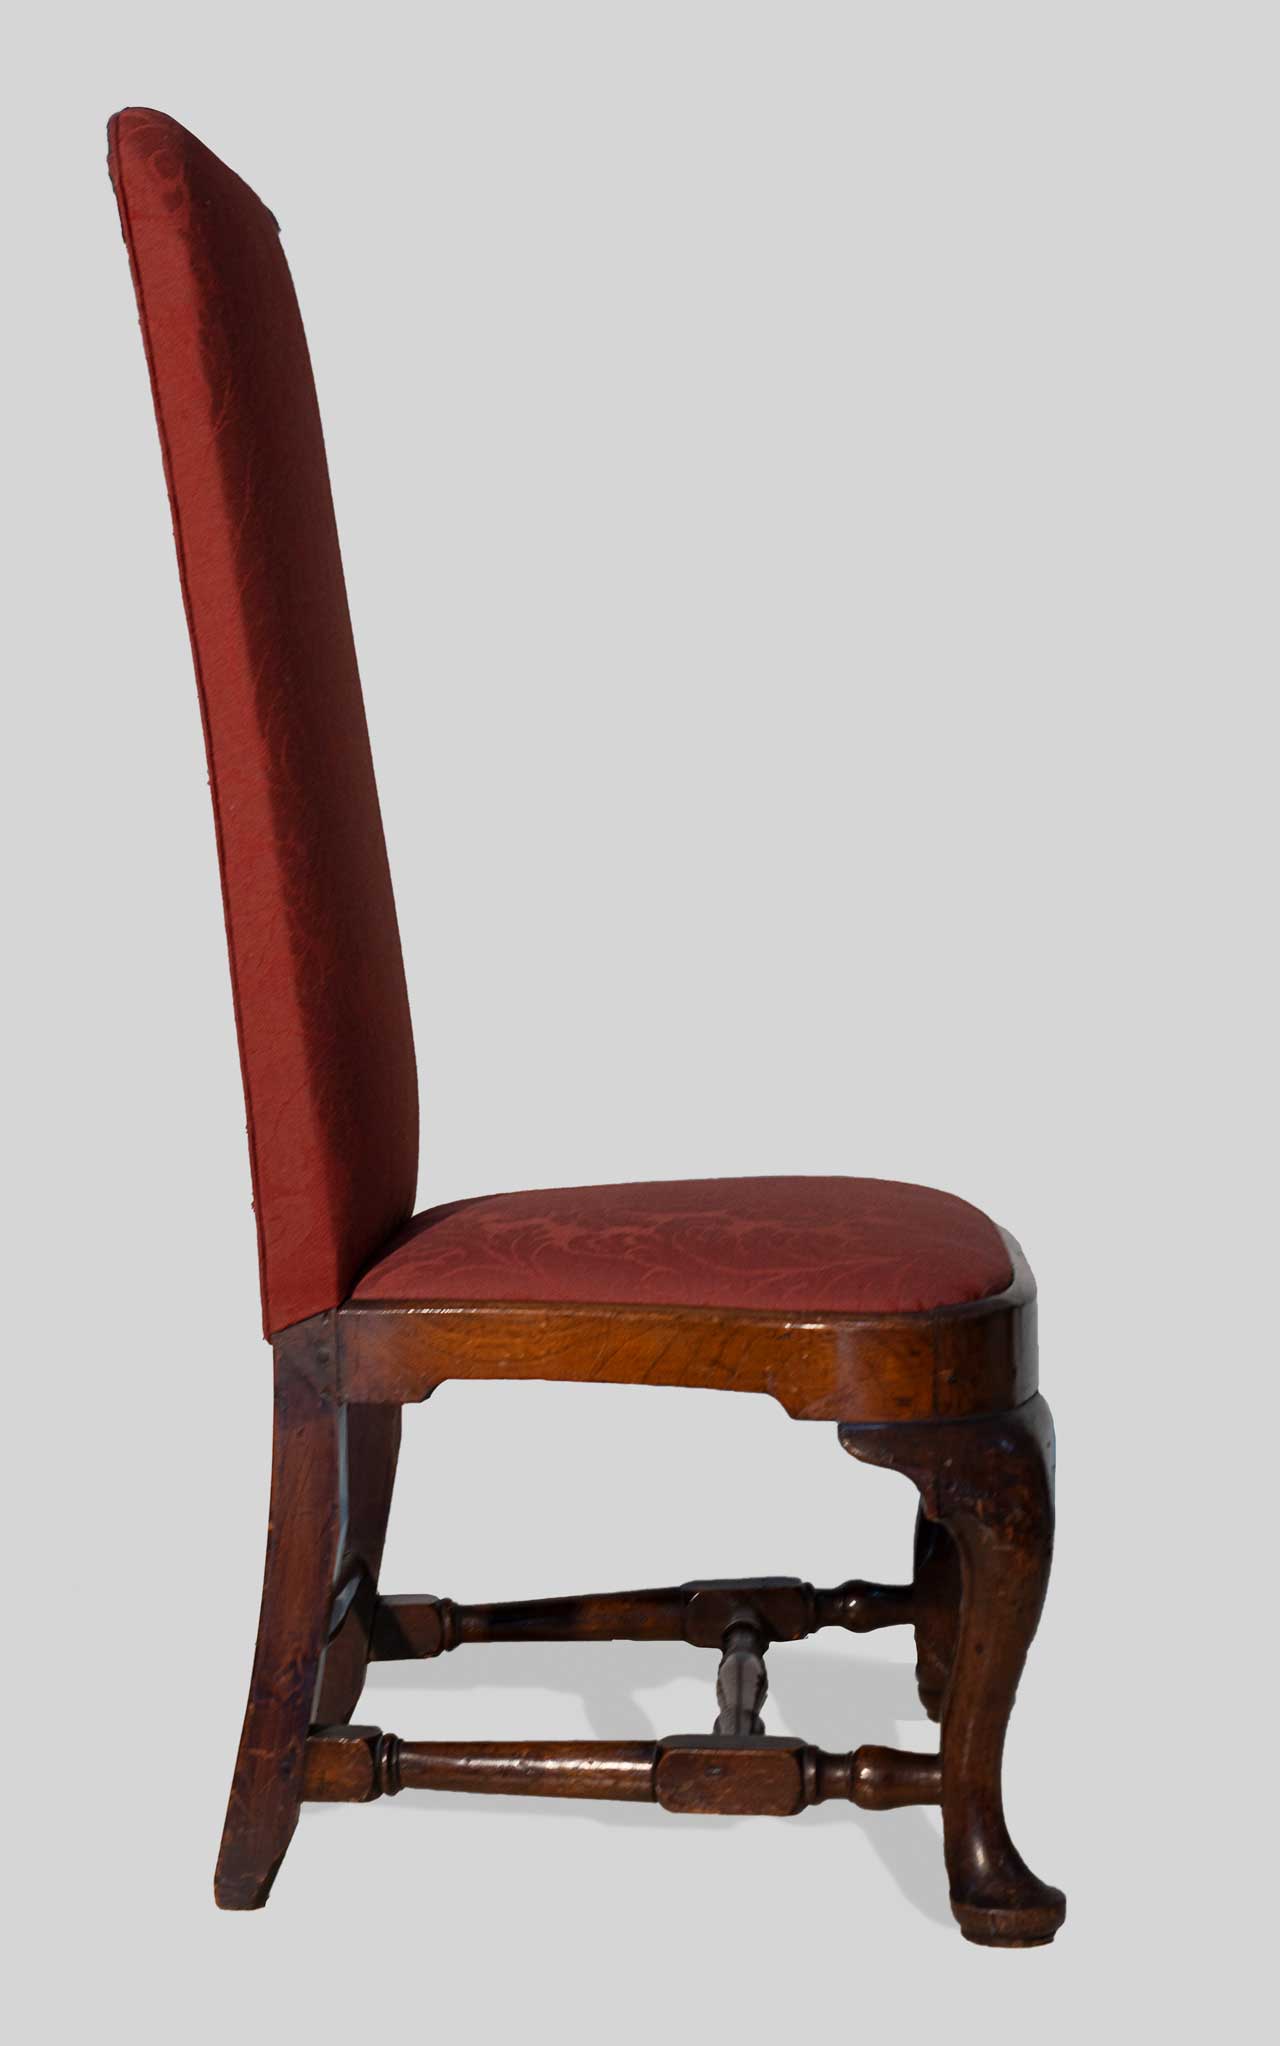 A rare and very fine Queen Anne back stool